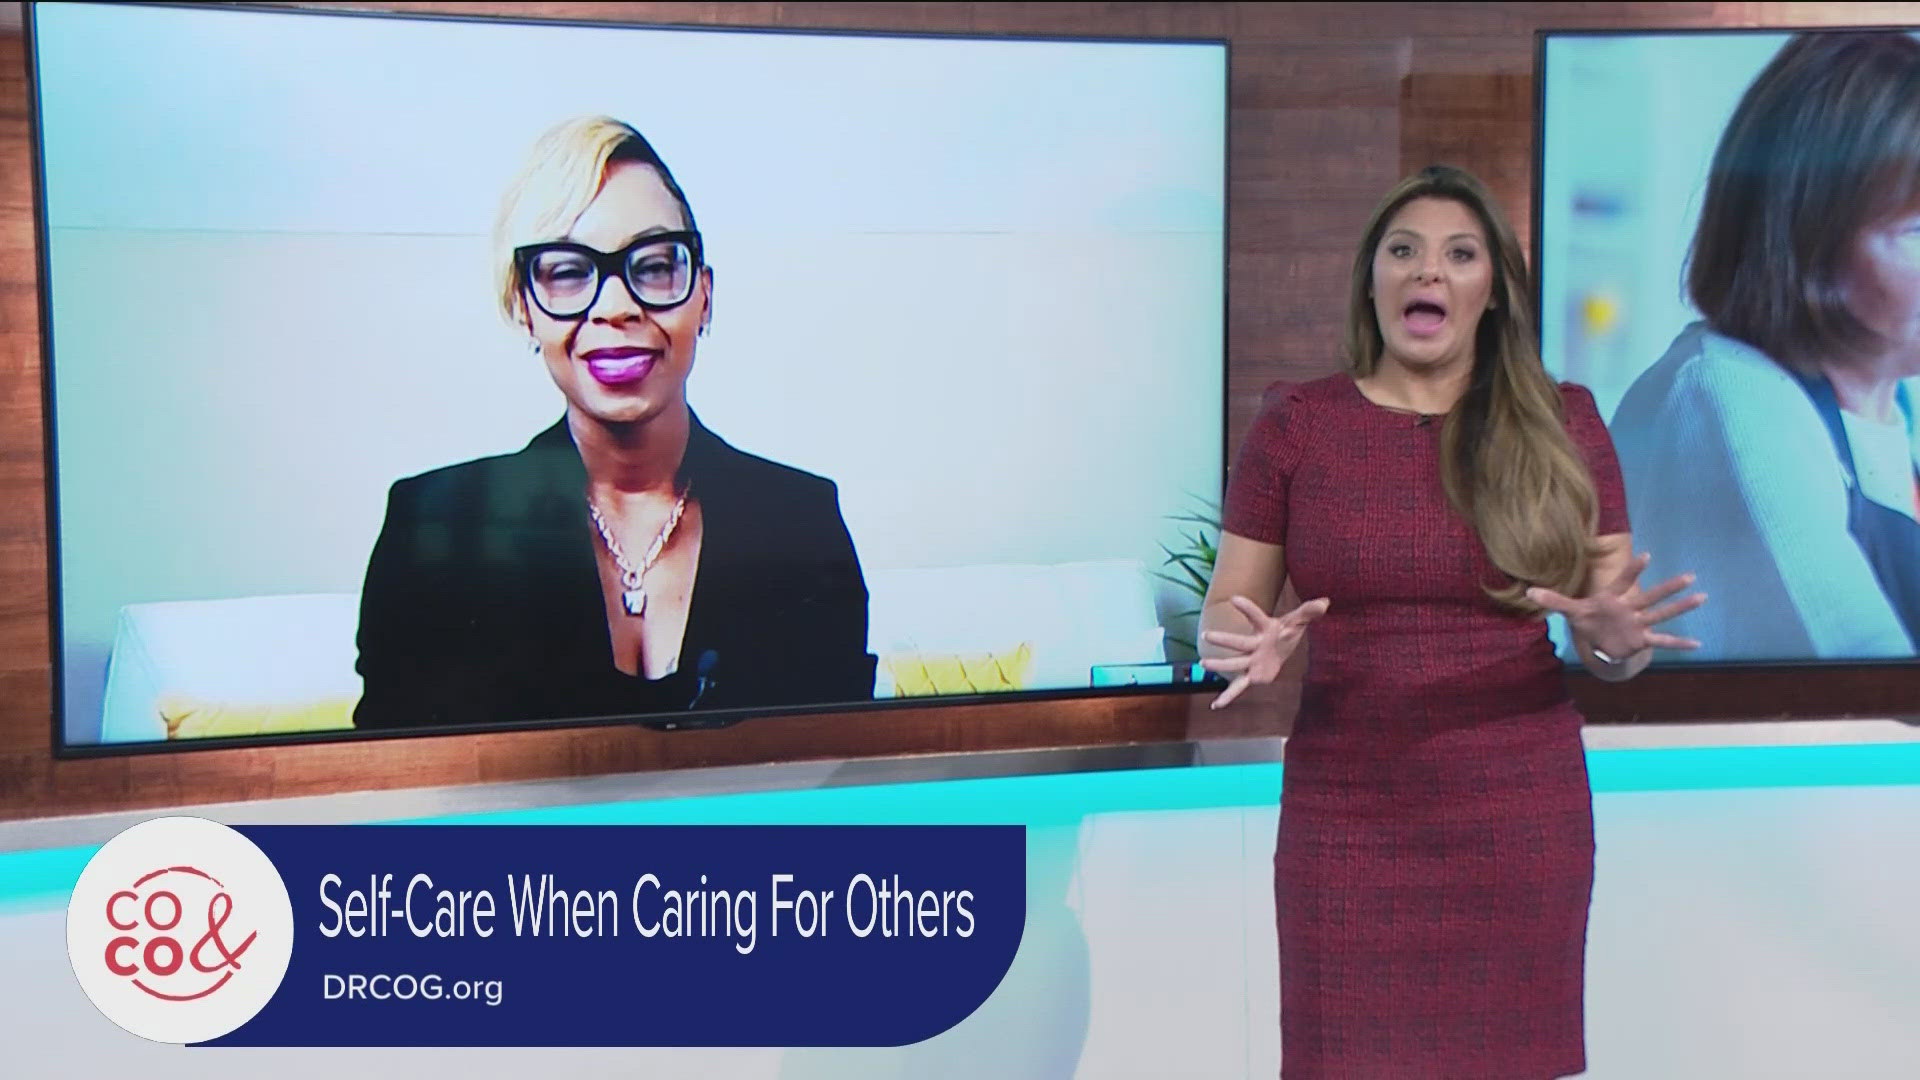 Avoid the burn-out of being a caregiver by treating yourself to some self-care. Dr. Macie Smith gives us the tips to know when caring for others. **PAID CONTENT**